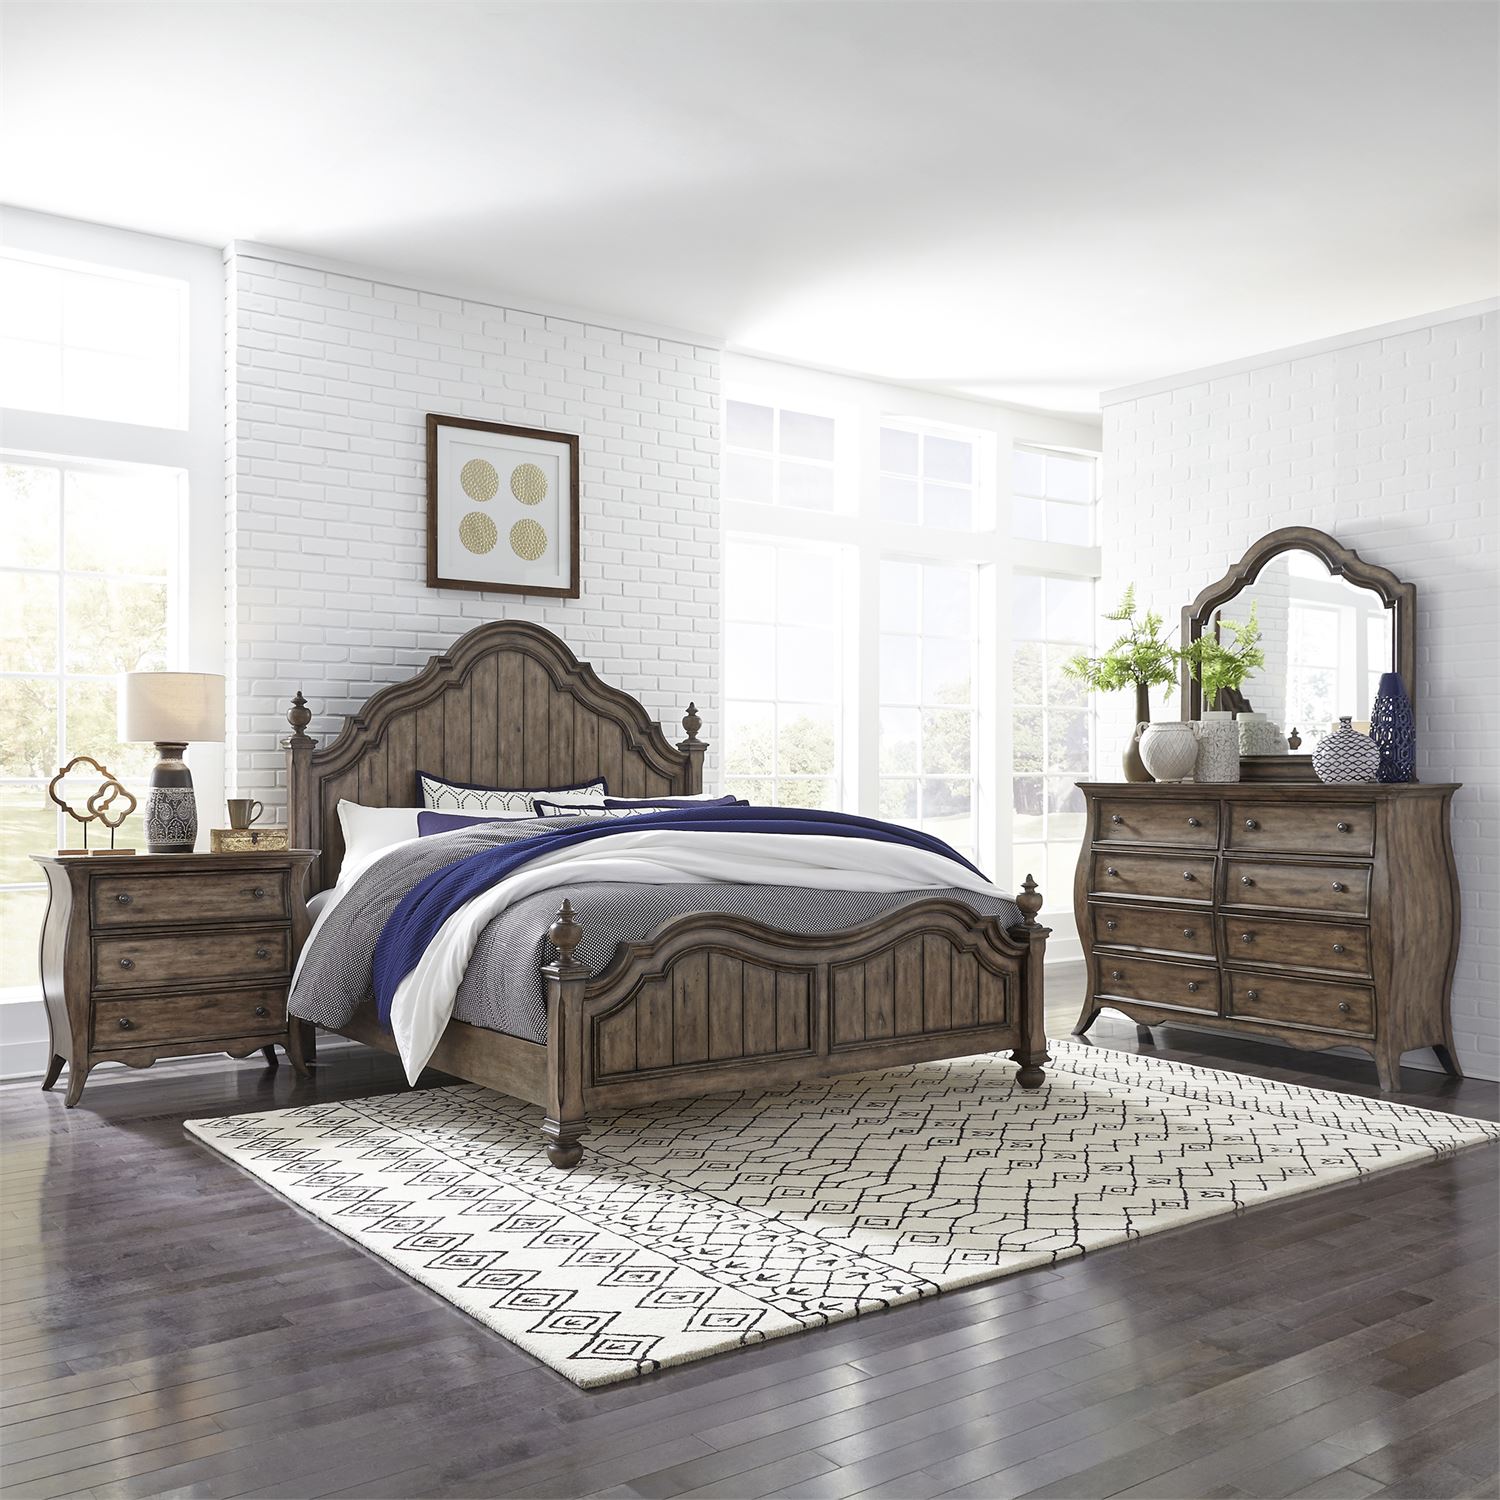 4 piece bedroom set in Heathered Brownstone Finish